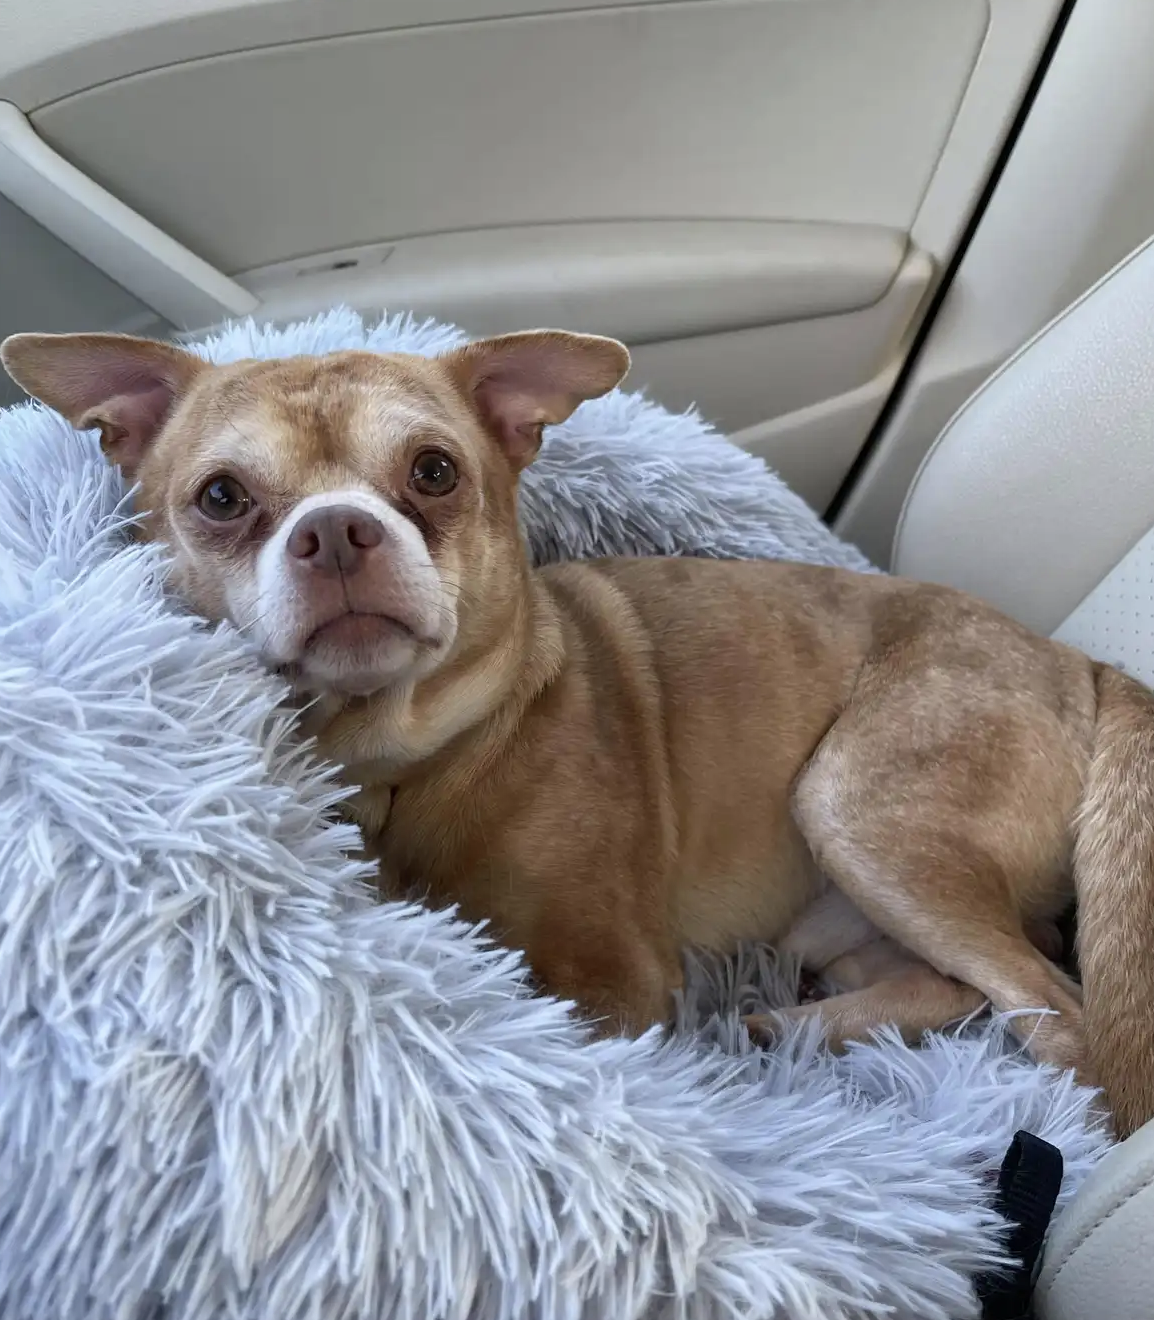 After a viral Facebook post, a dog that put his family through a ‘demonic Chihuahua hellscape’ was adopted.